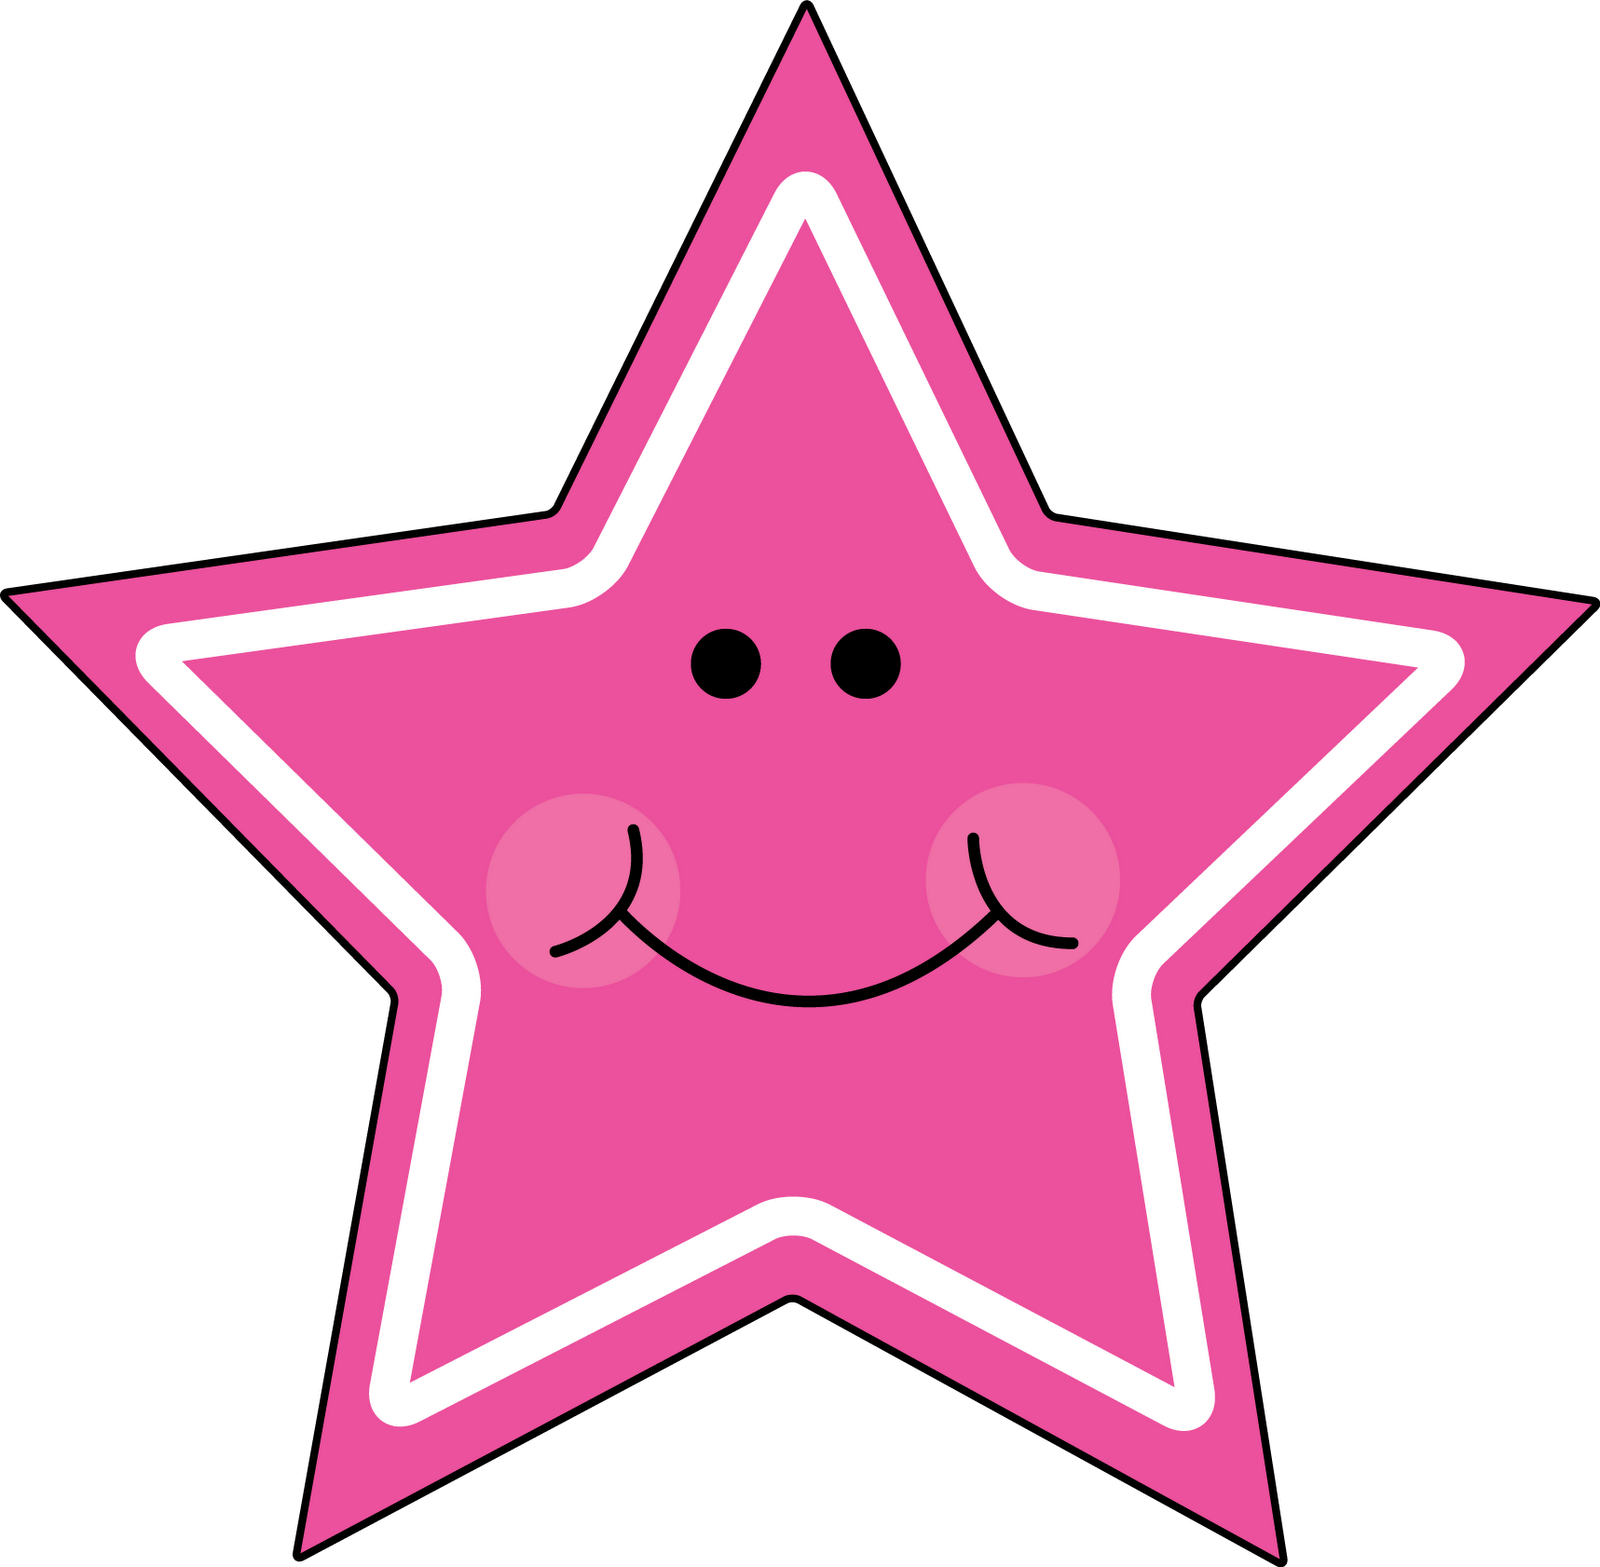 Star Shape Clip Art Images & Pictures - Becuo